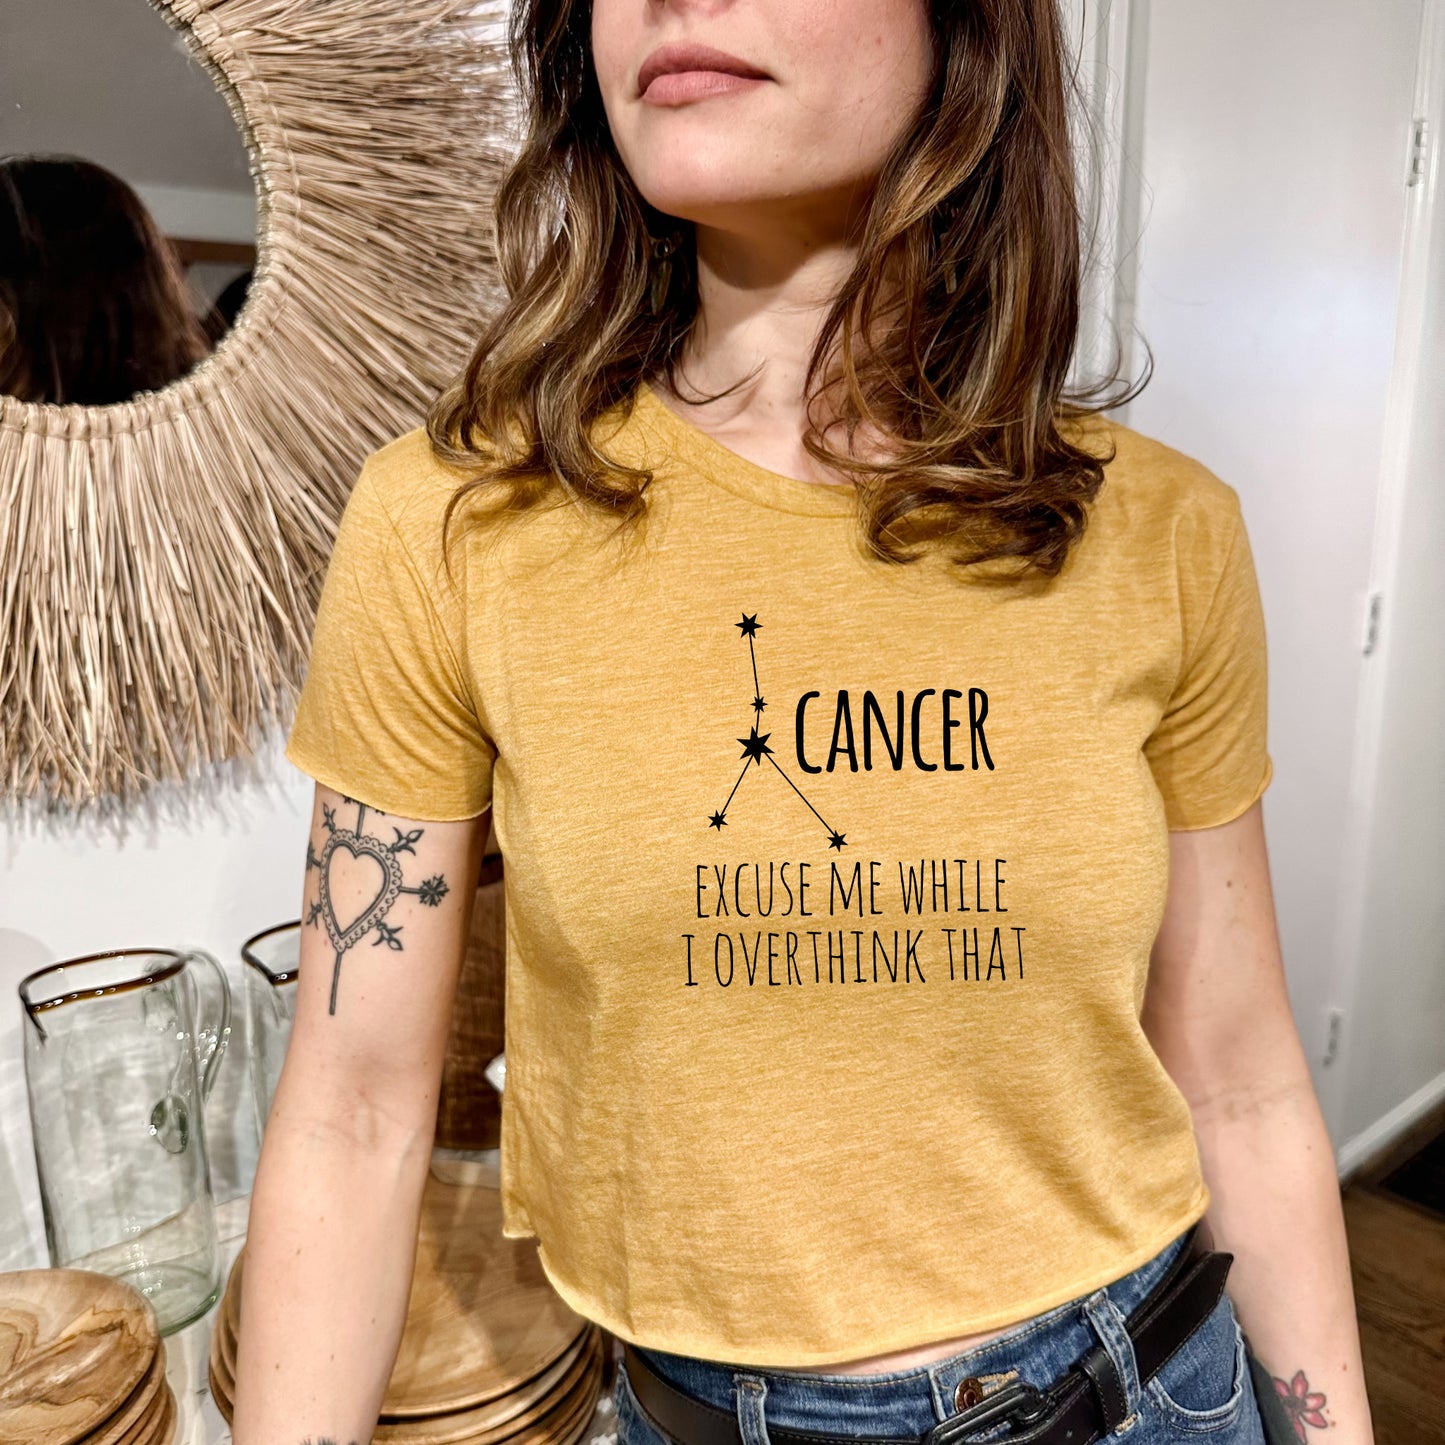 Cancer - Women's Crop Tee - Heather Gray or Gold